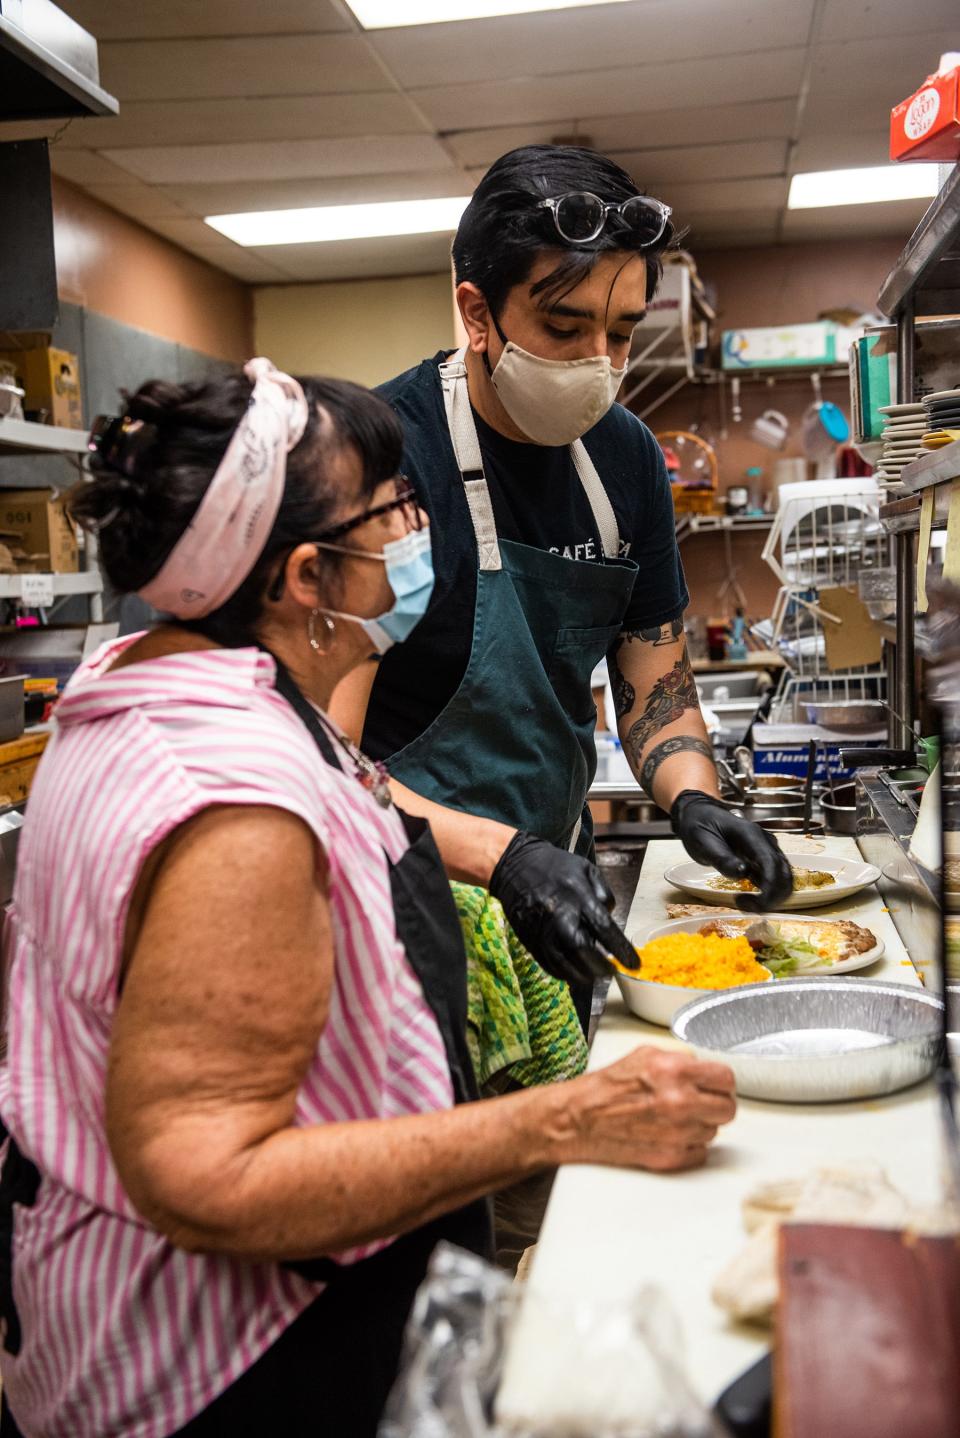 Barbara Valle, co-owner of Cafe Fiesta in Woodbury, left, and her son Carlos Valle, right, prepare meals for customers in the kitchen.